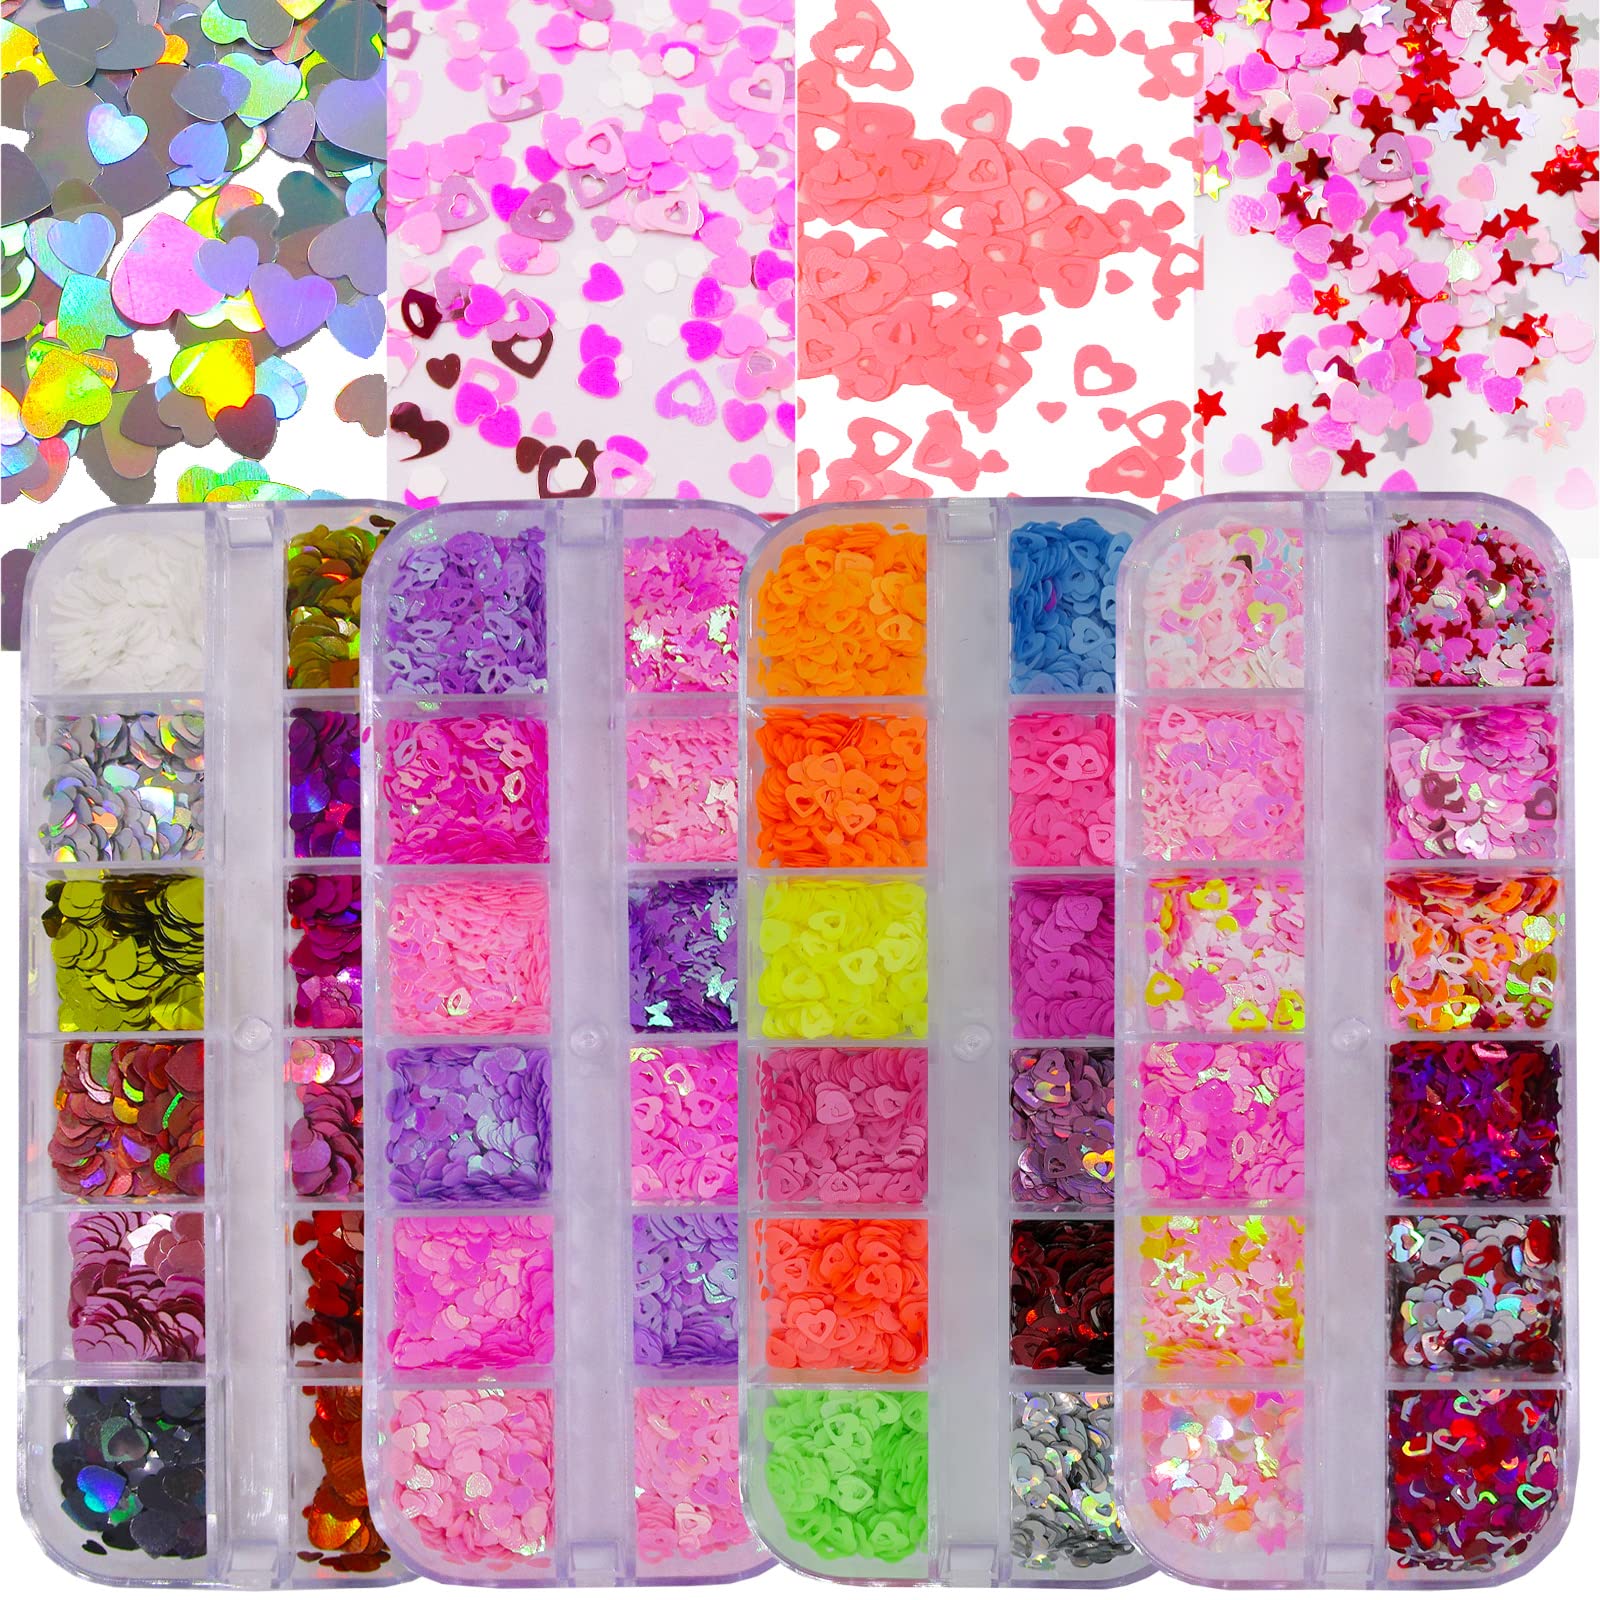  Resin Filling Accessories,Card Style Nail Art Sequins,Numbers  Letter Nail Glitter for Nail Art and Jewelry Making : Beauty & Personal Care